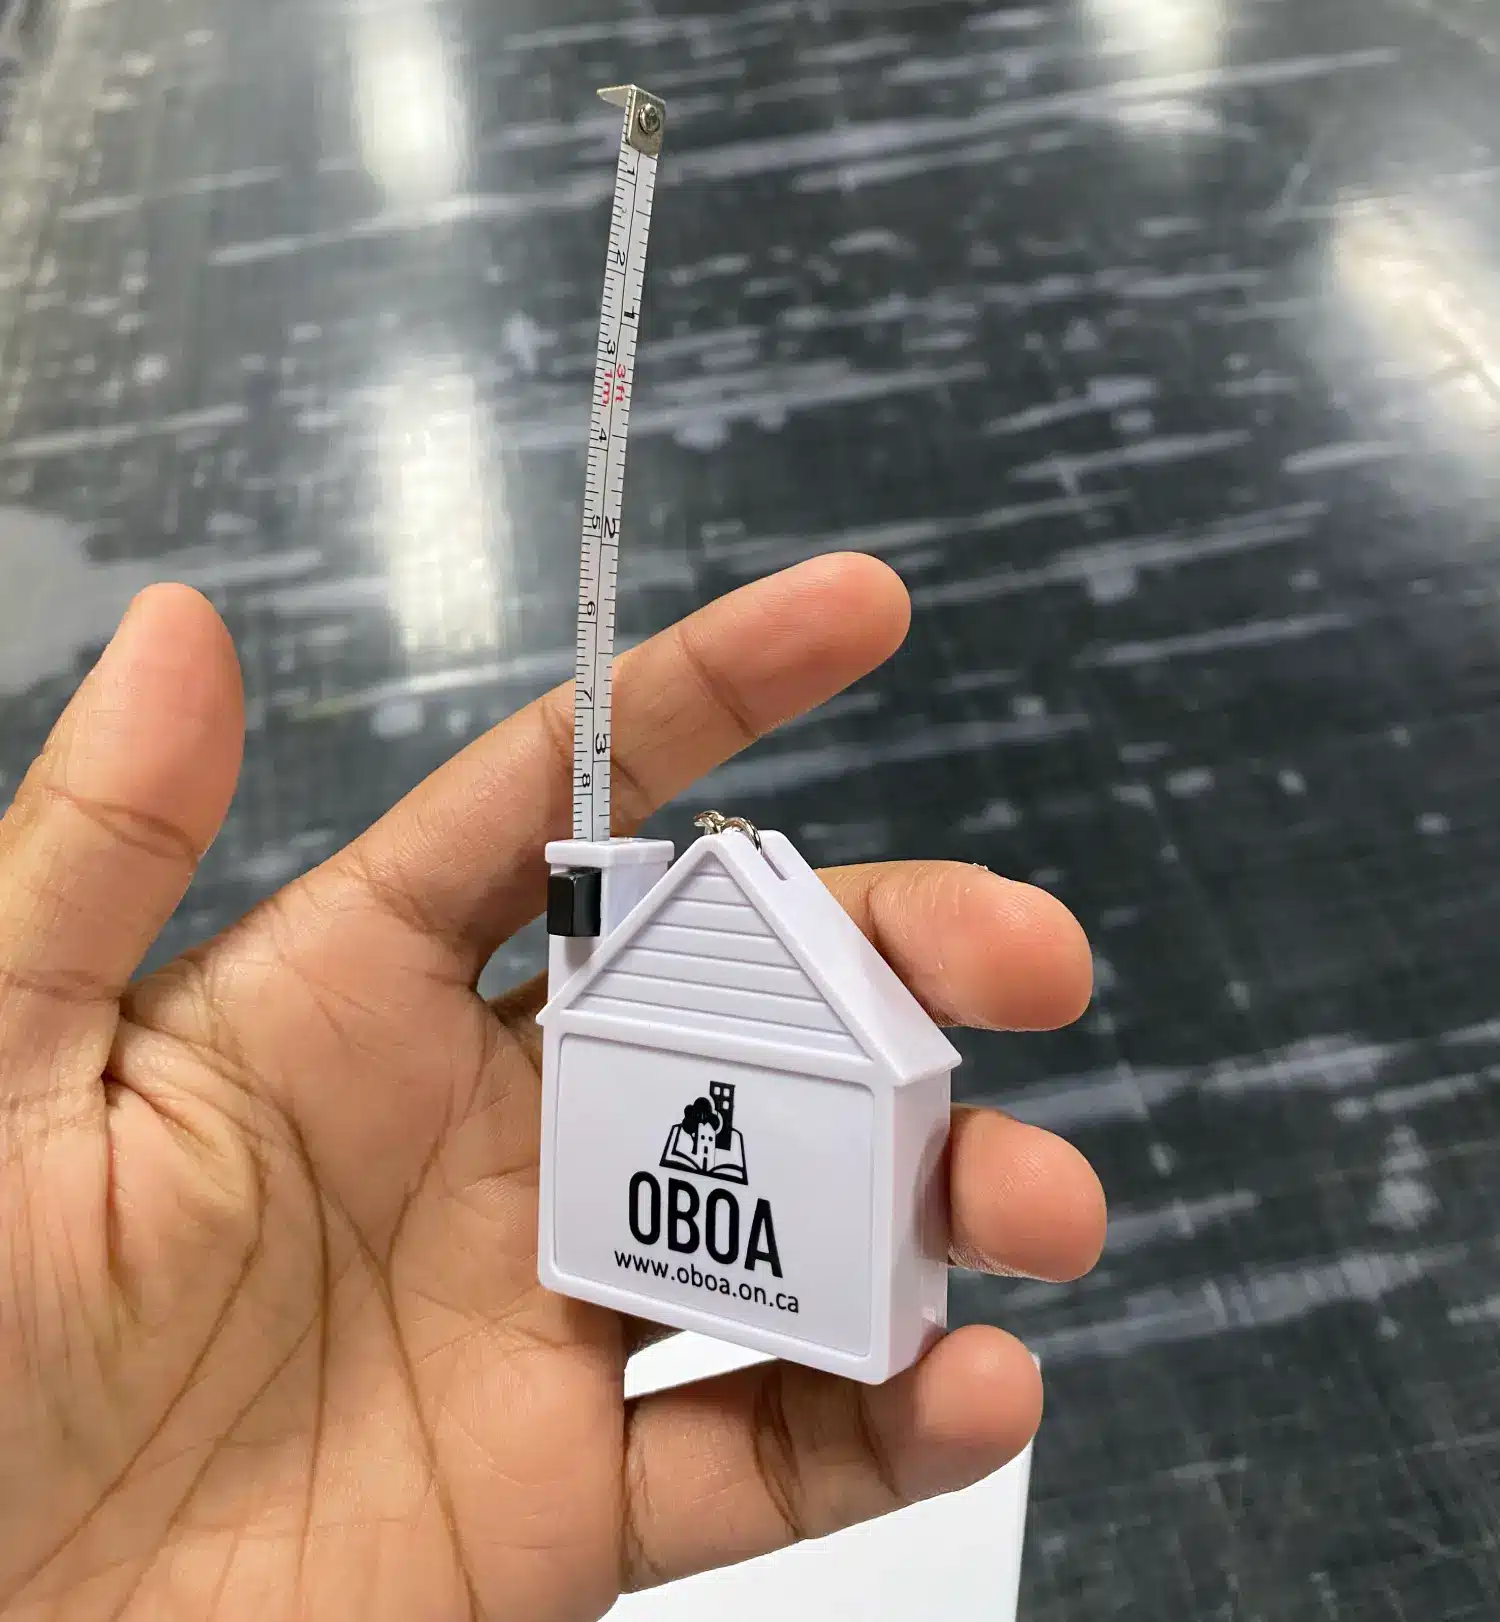 Custom Promotional Keychain Measuring Tapes for OBOA - Promotional Products in Toronto